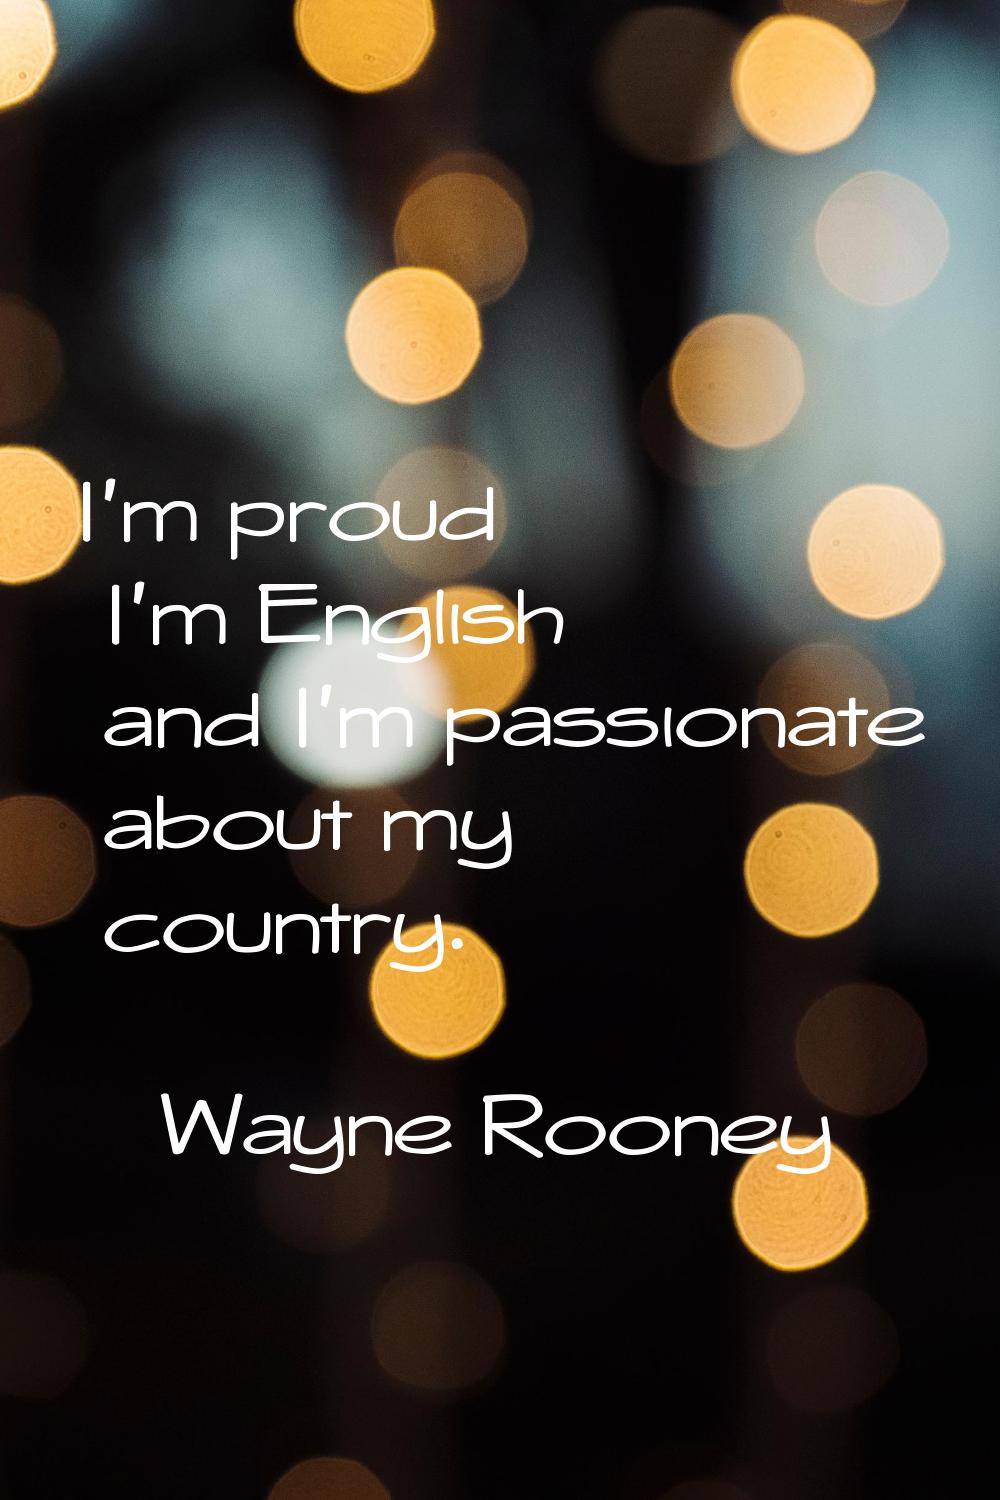 I'm proud I'm English and I'm passionate about my country.